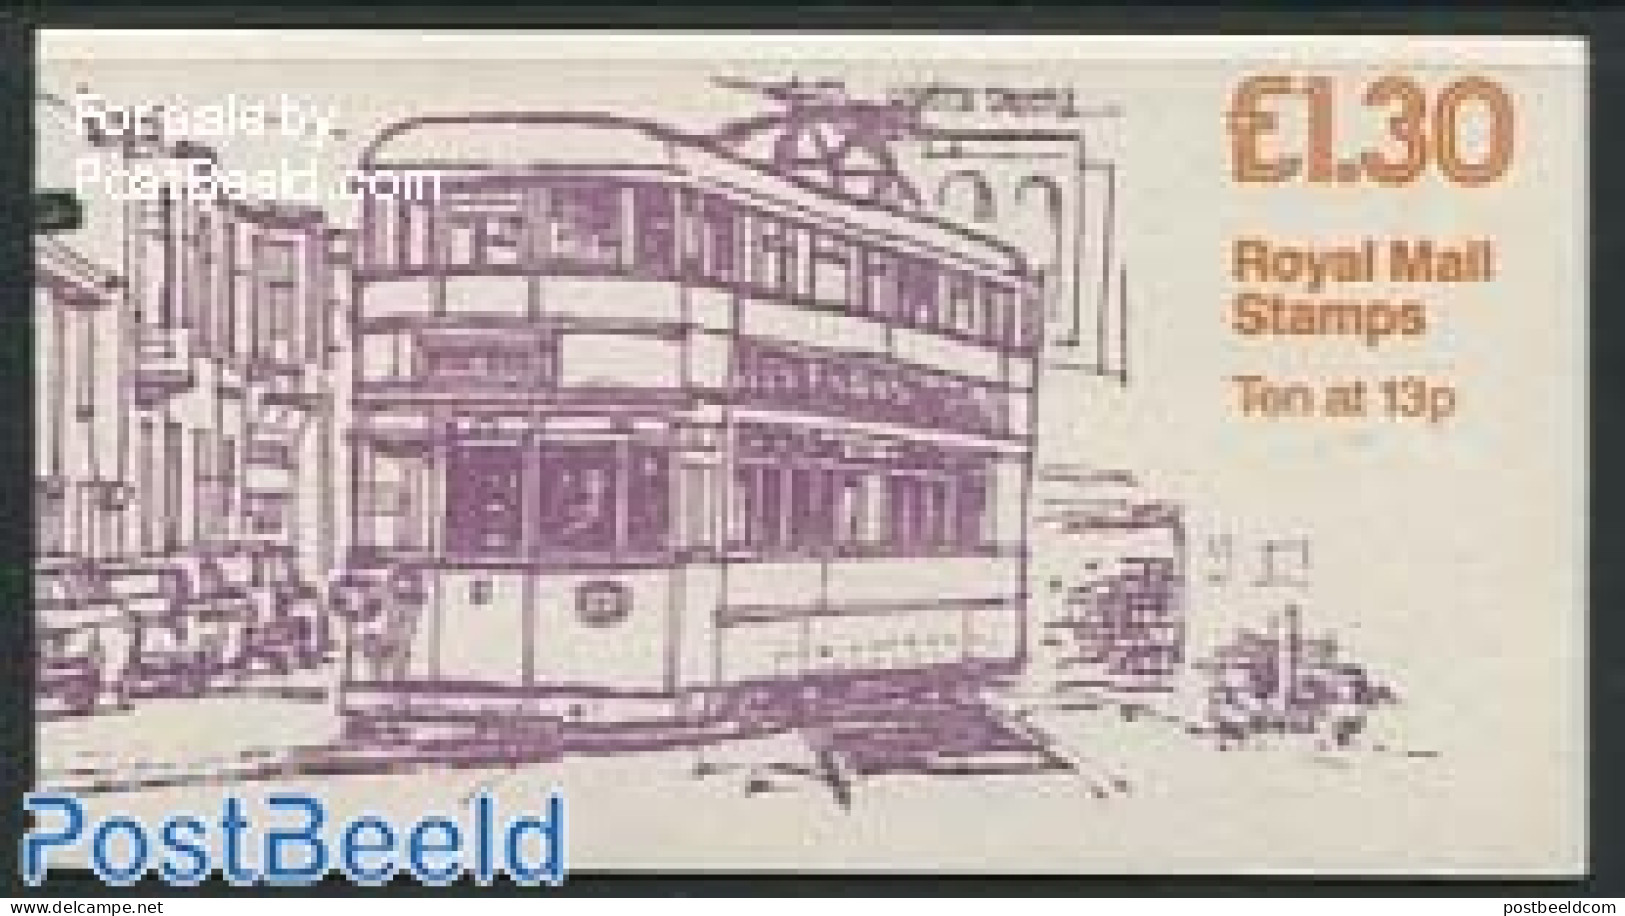 Great Britain 1984 Def. Booklet, Swansea/Mumbles, Selvedge At Right, Mint NH, Transport - Stamp Booklets - Railways - .. - Neufs